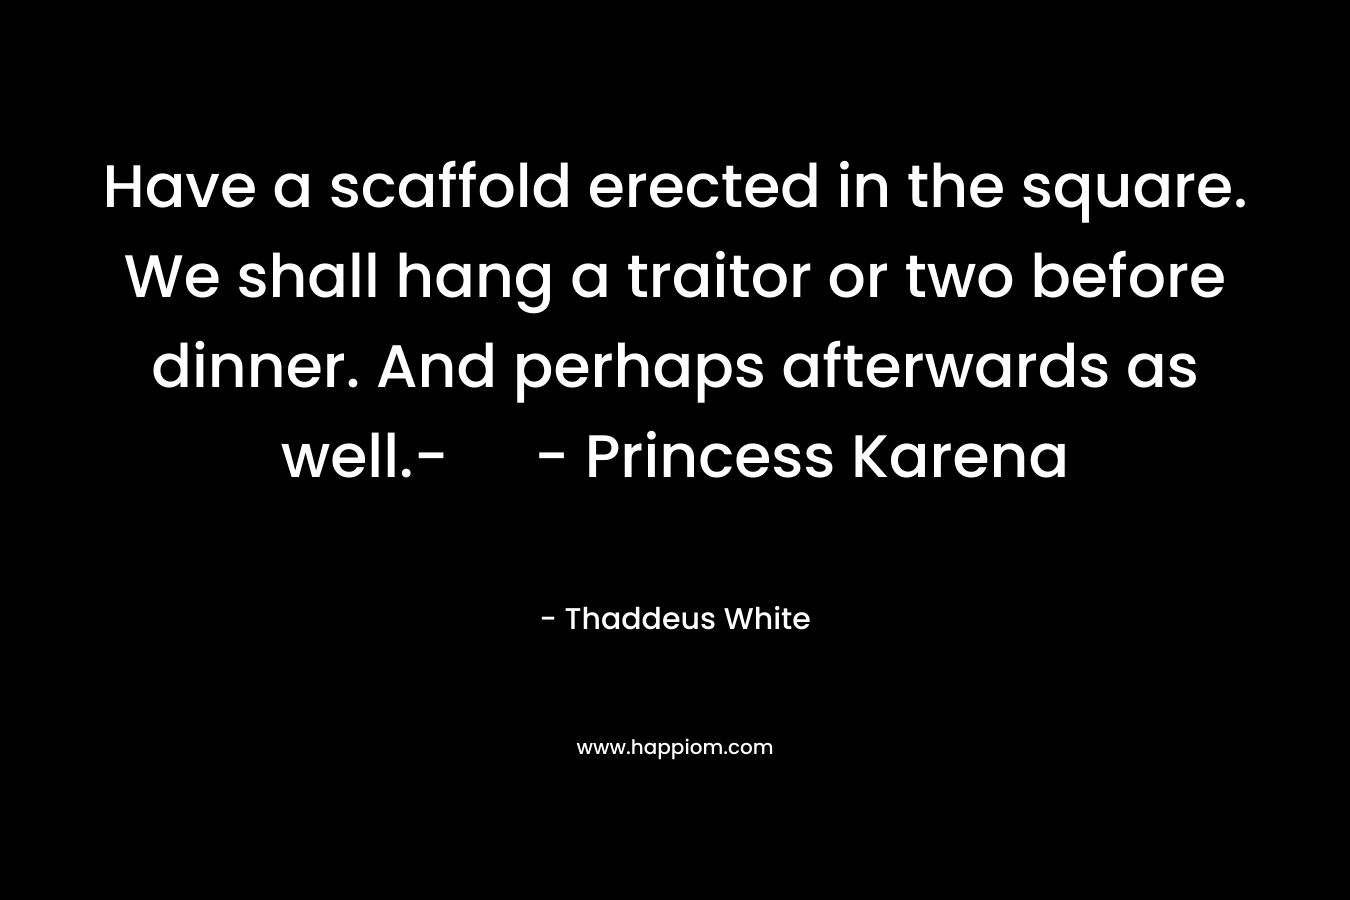 Have a scaffold erected in the square. We shall hang a traitor or two before dinner. And perhaps afterwards as well.- - Princess Karena